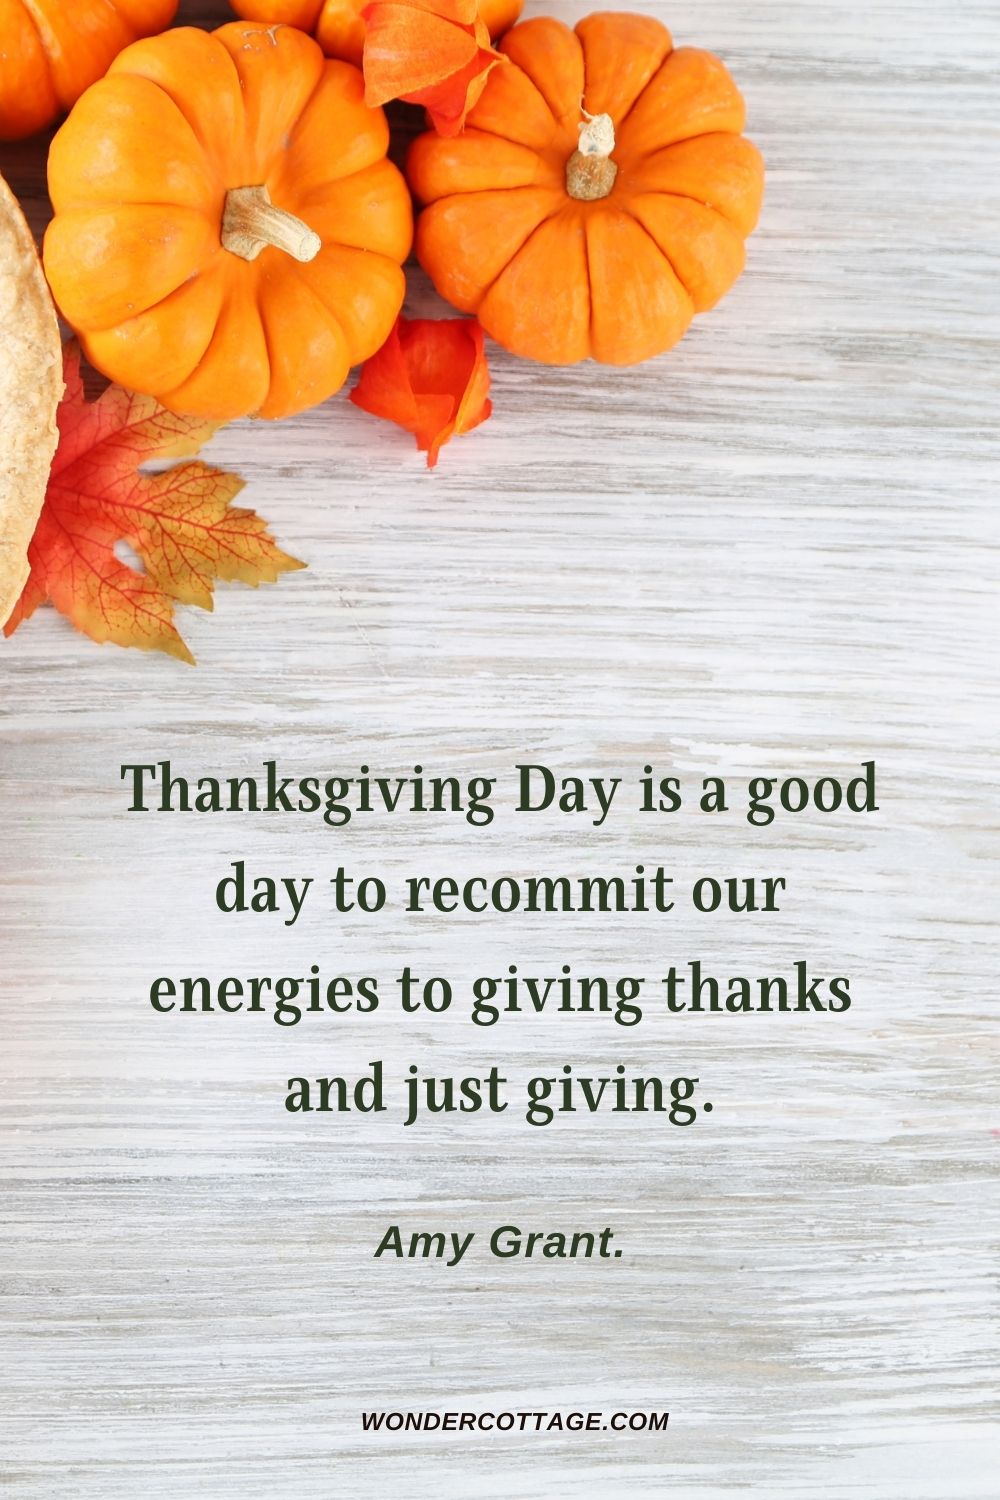 Thanksgiving Day is a good day to recommit our energies to giving thanks and just giving. Amy Grant